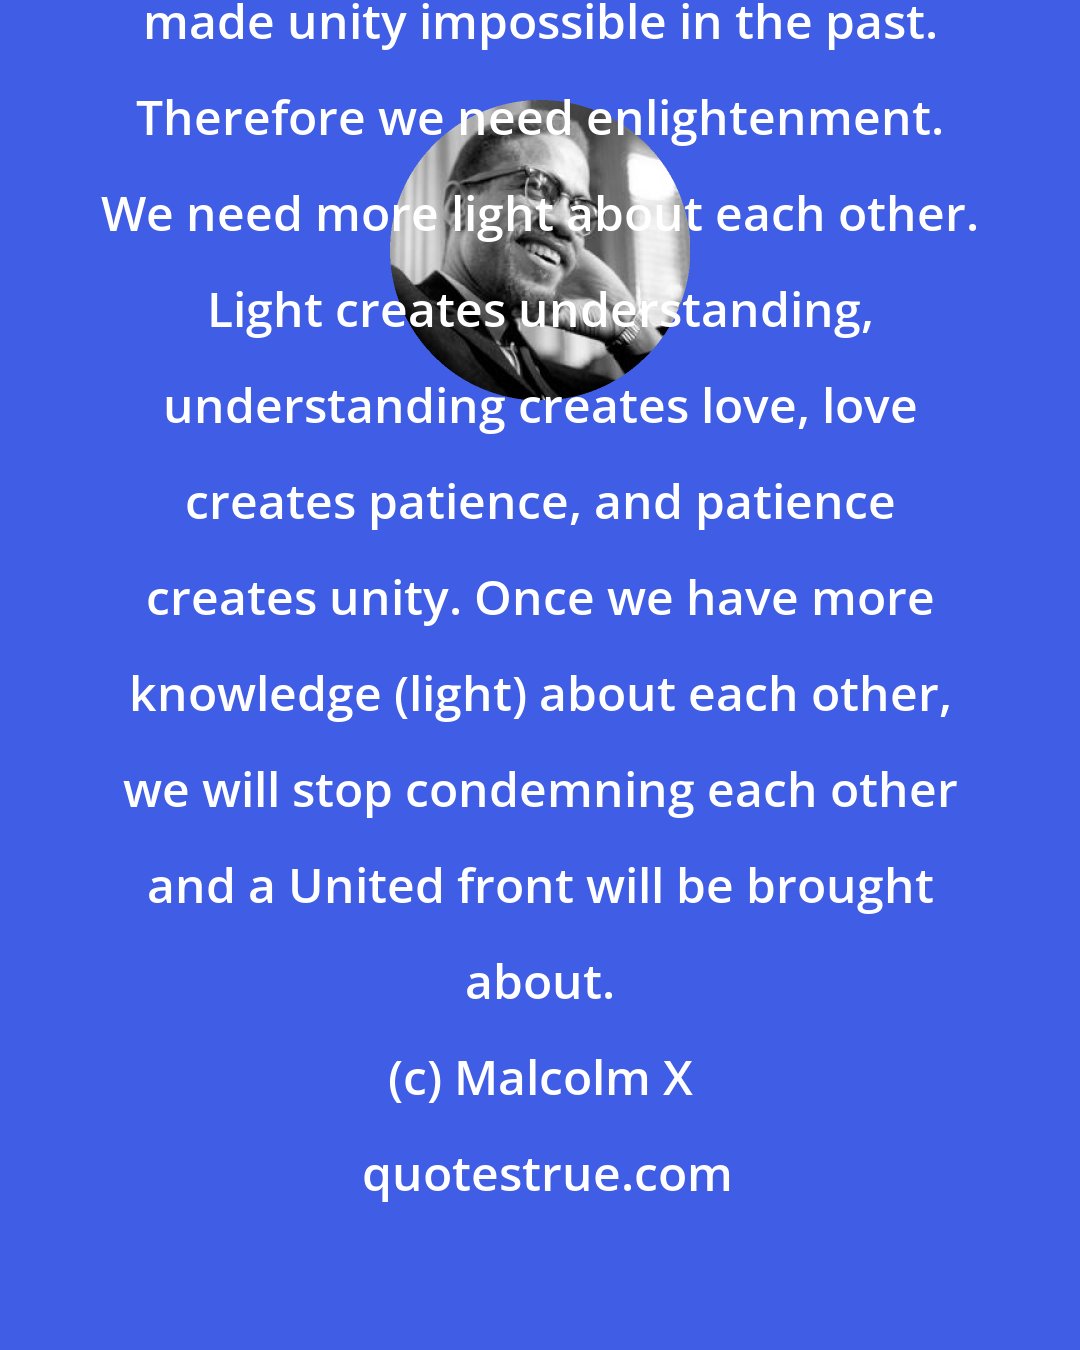 Malcolm X: Ignorance of each other is what has made unity impossible in the past. Therefore we need enlightenment. We need more light about each other. Light creates understanding, understanding creates love, love creates patience, and patience creates unity. Once we have more knowledge (light) about each other, we will stop condemning each other and a United front will be brought about.